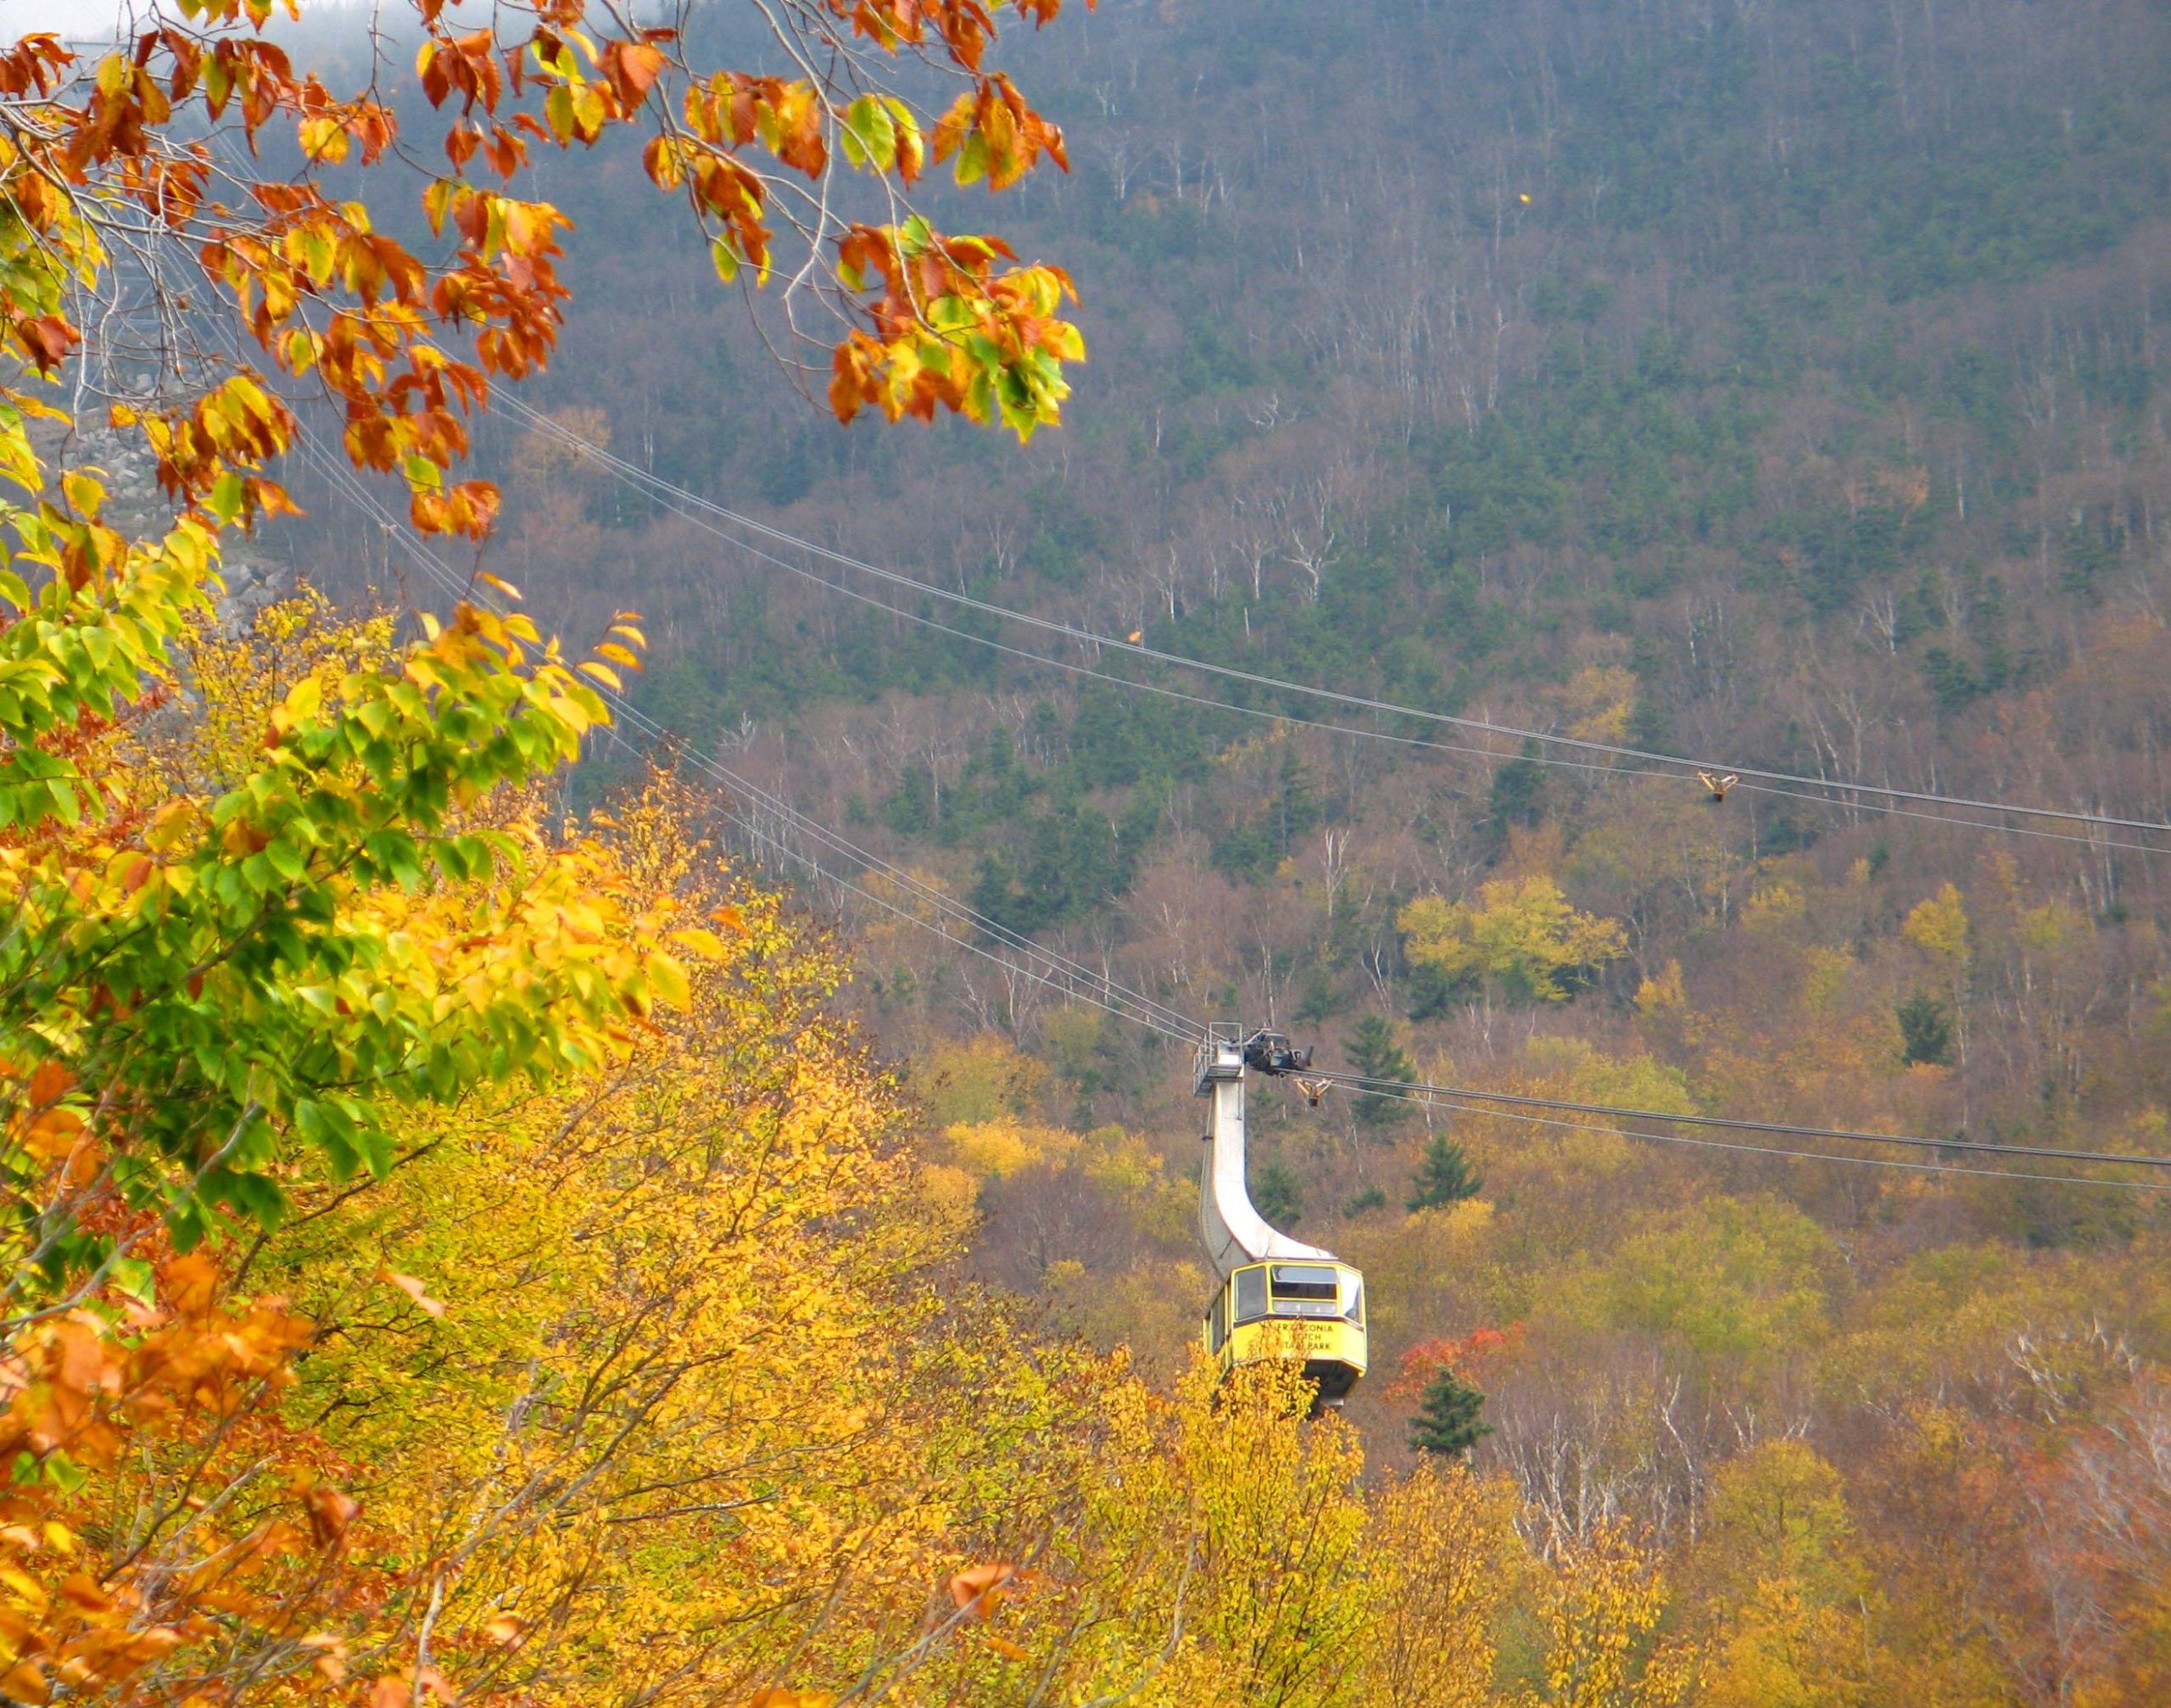 Cannon Mt. Tram (user submitted)